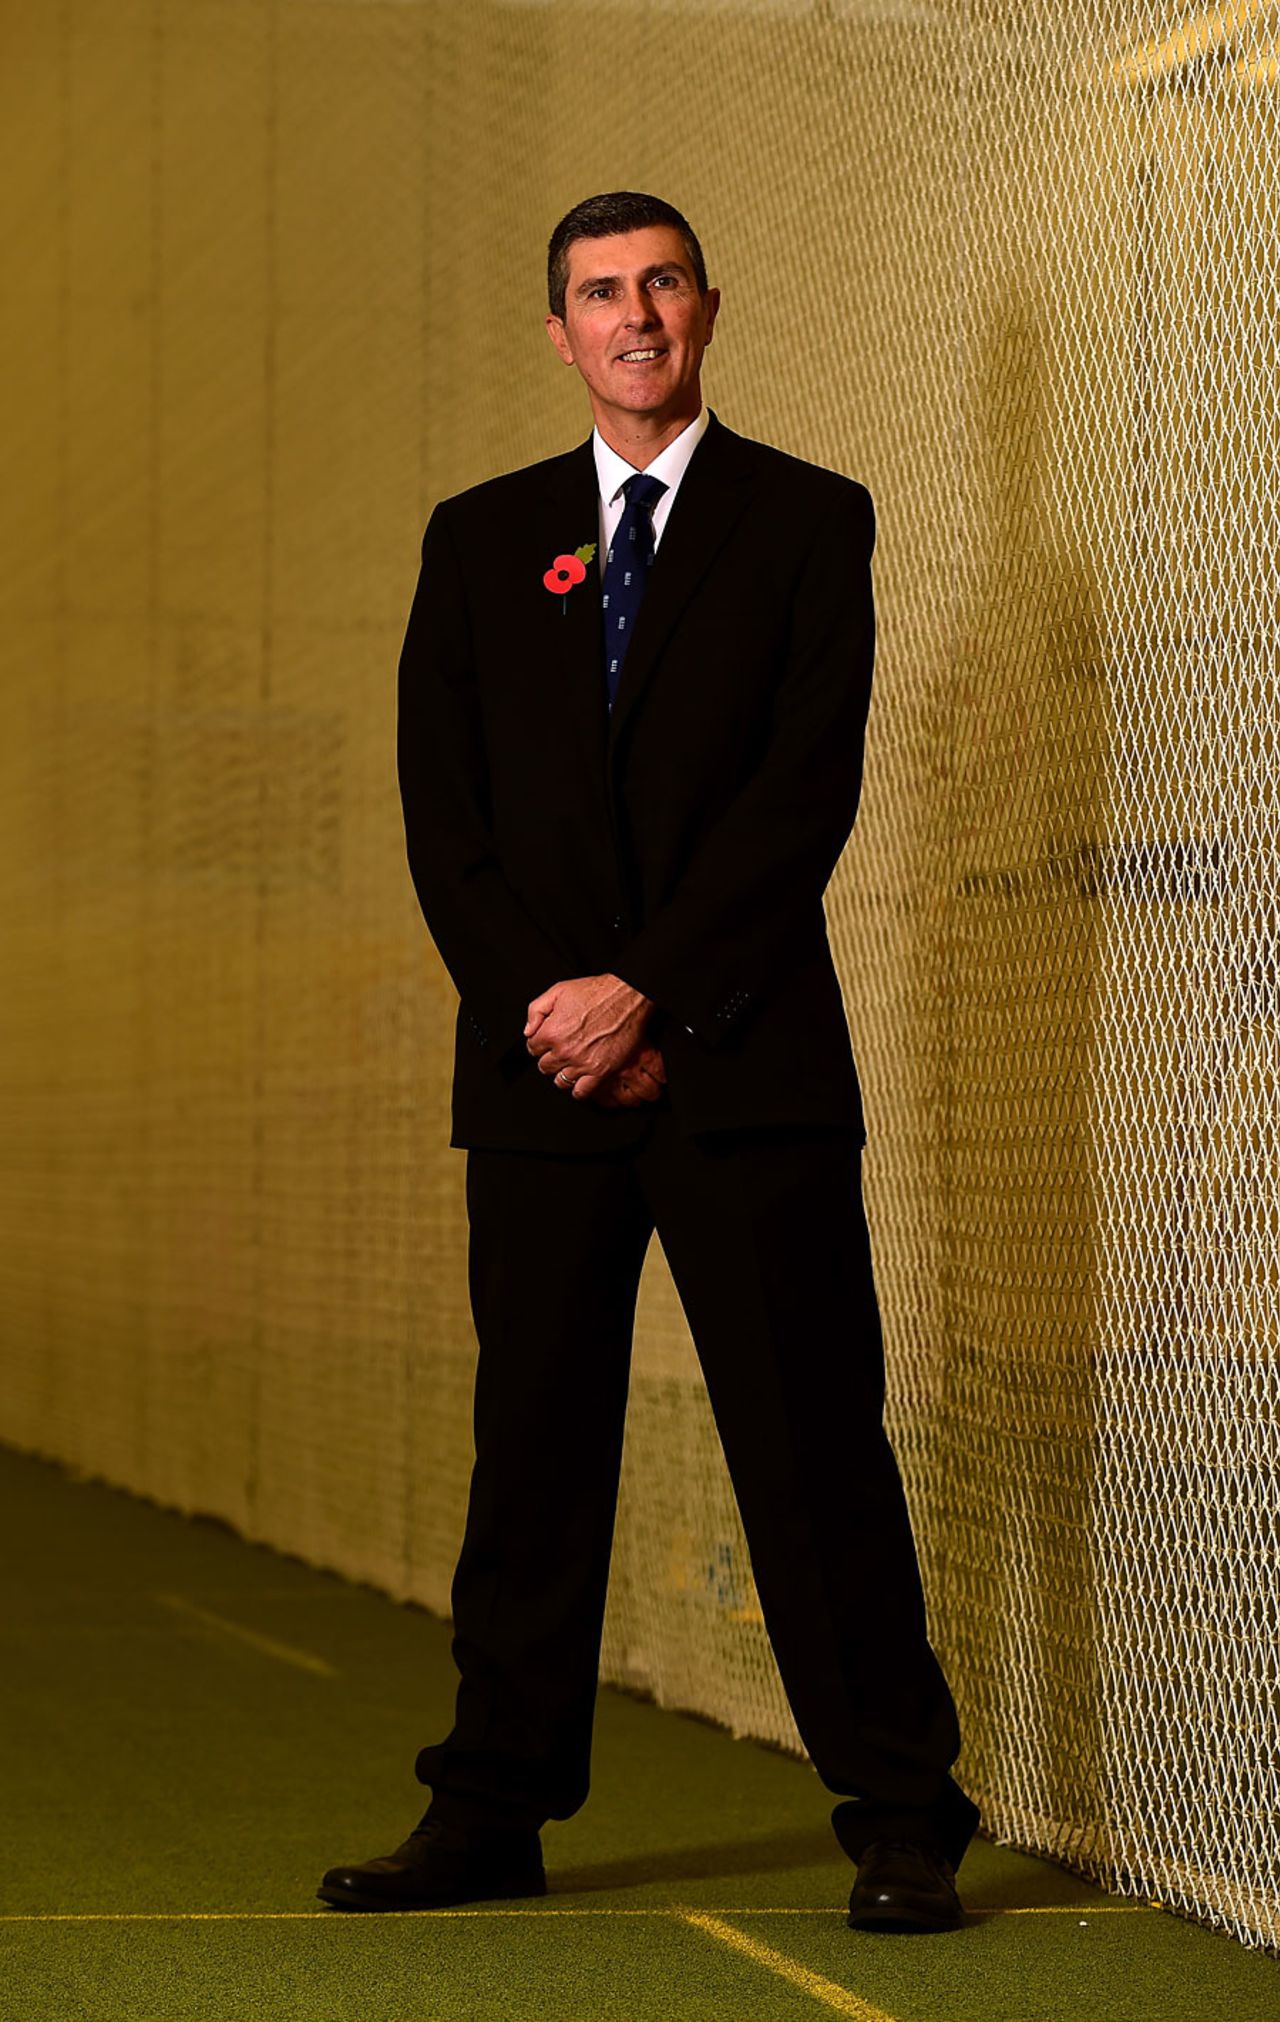 Mark Robinson has been named the new head coach of England Women, Lord's, November 11, 2015